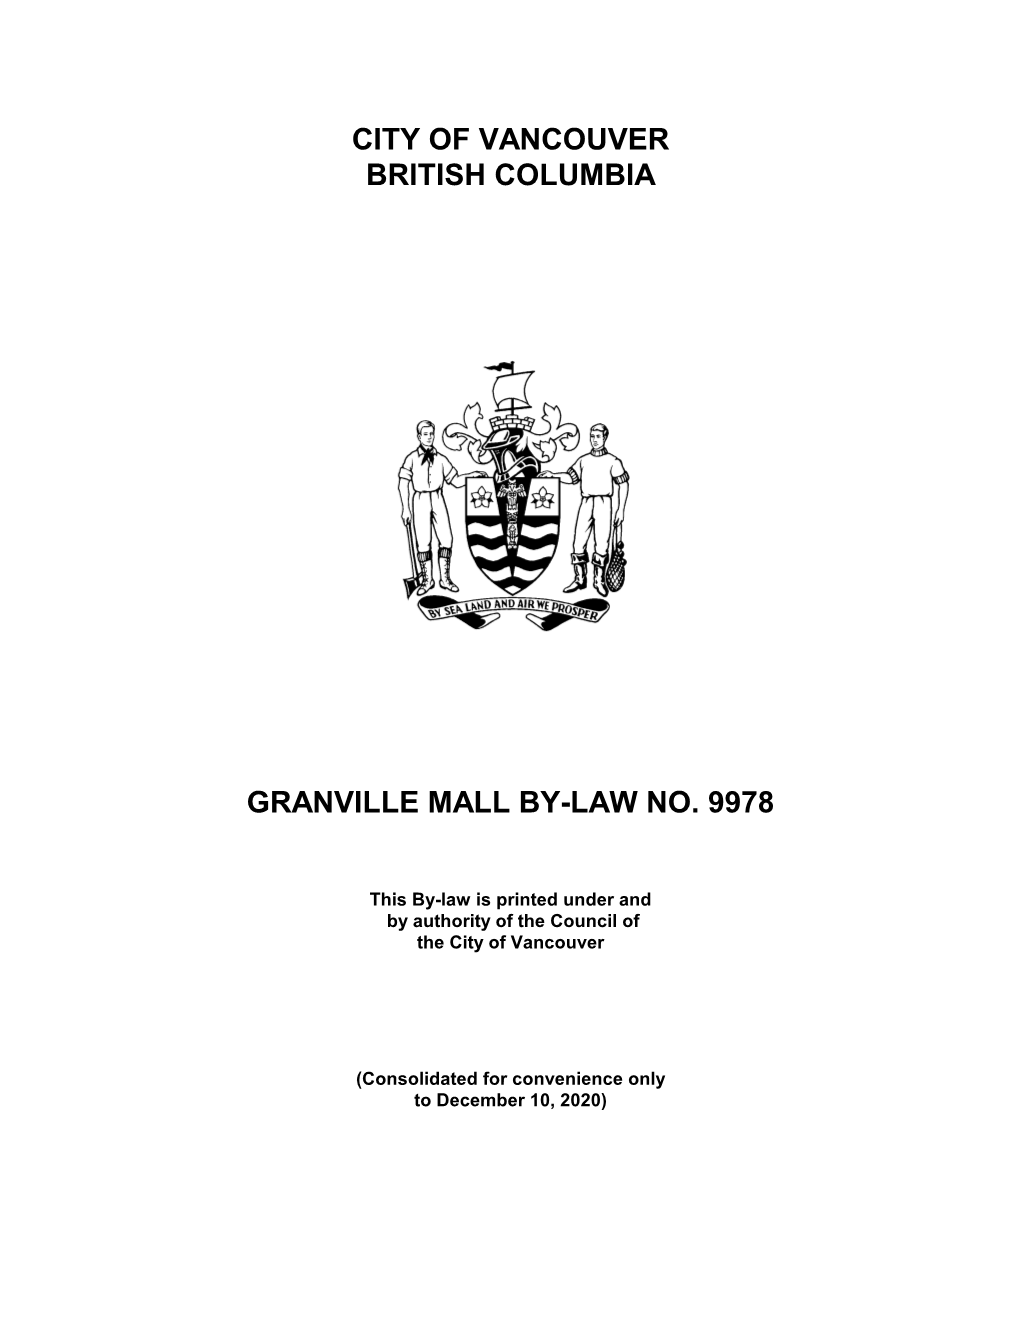 City of Vancouver British Columbia Granville Mall By-Law No. 9978